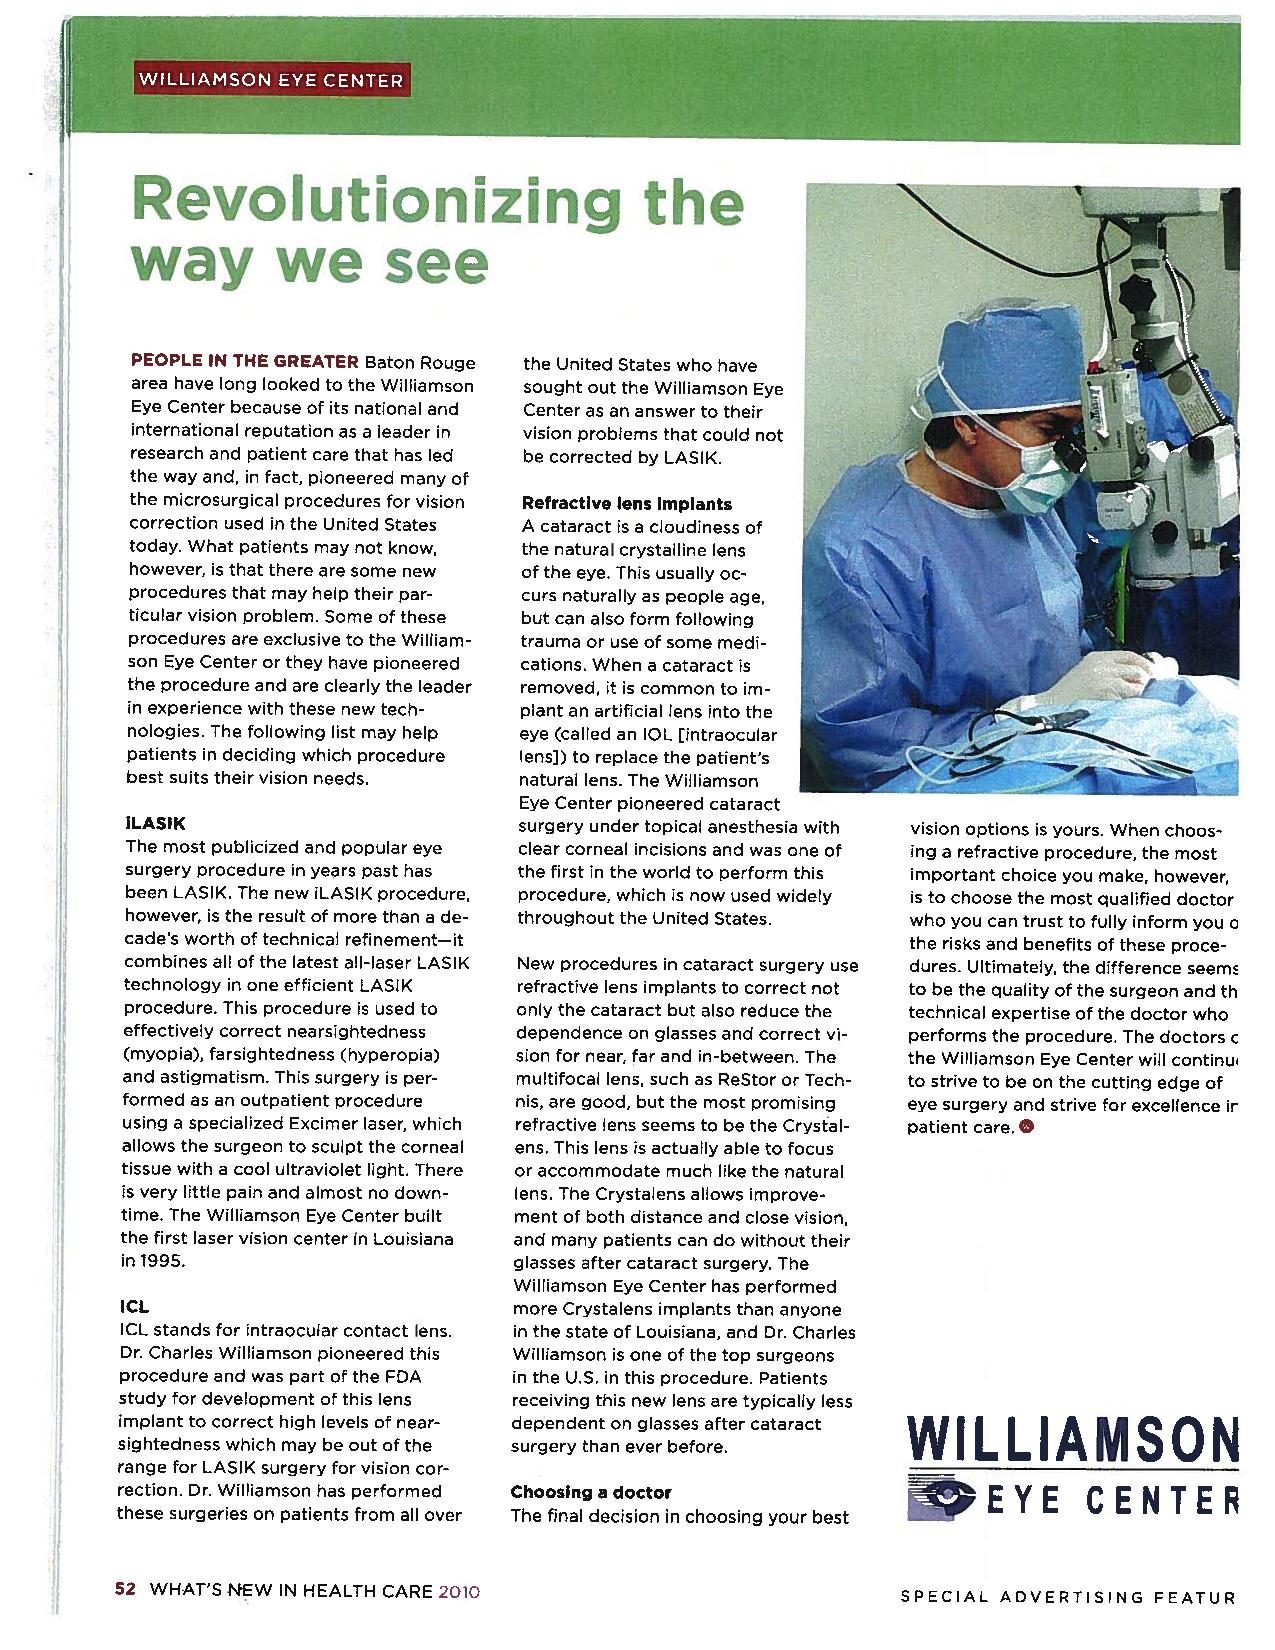 An article from a Williamson Eye Center Featured Ad, talking about iLASIK, ICLs, and Refractive Lens Implants.